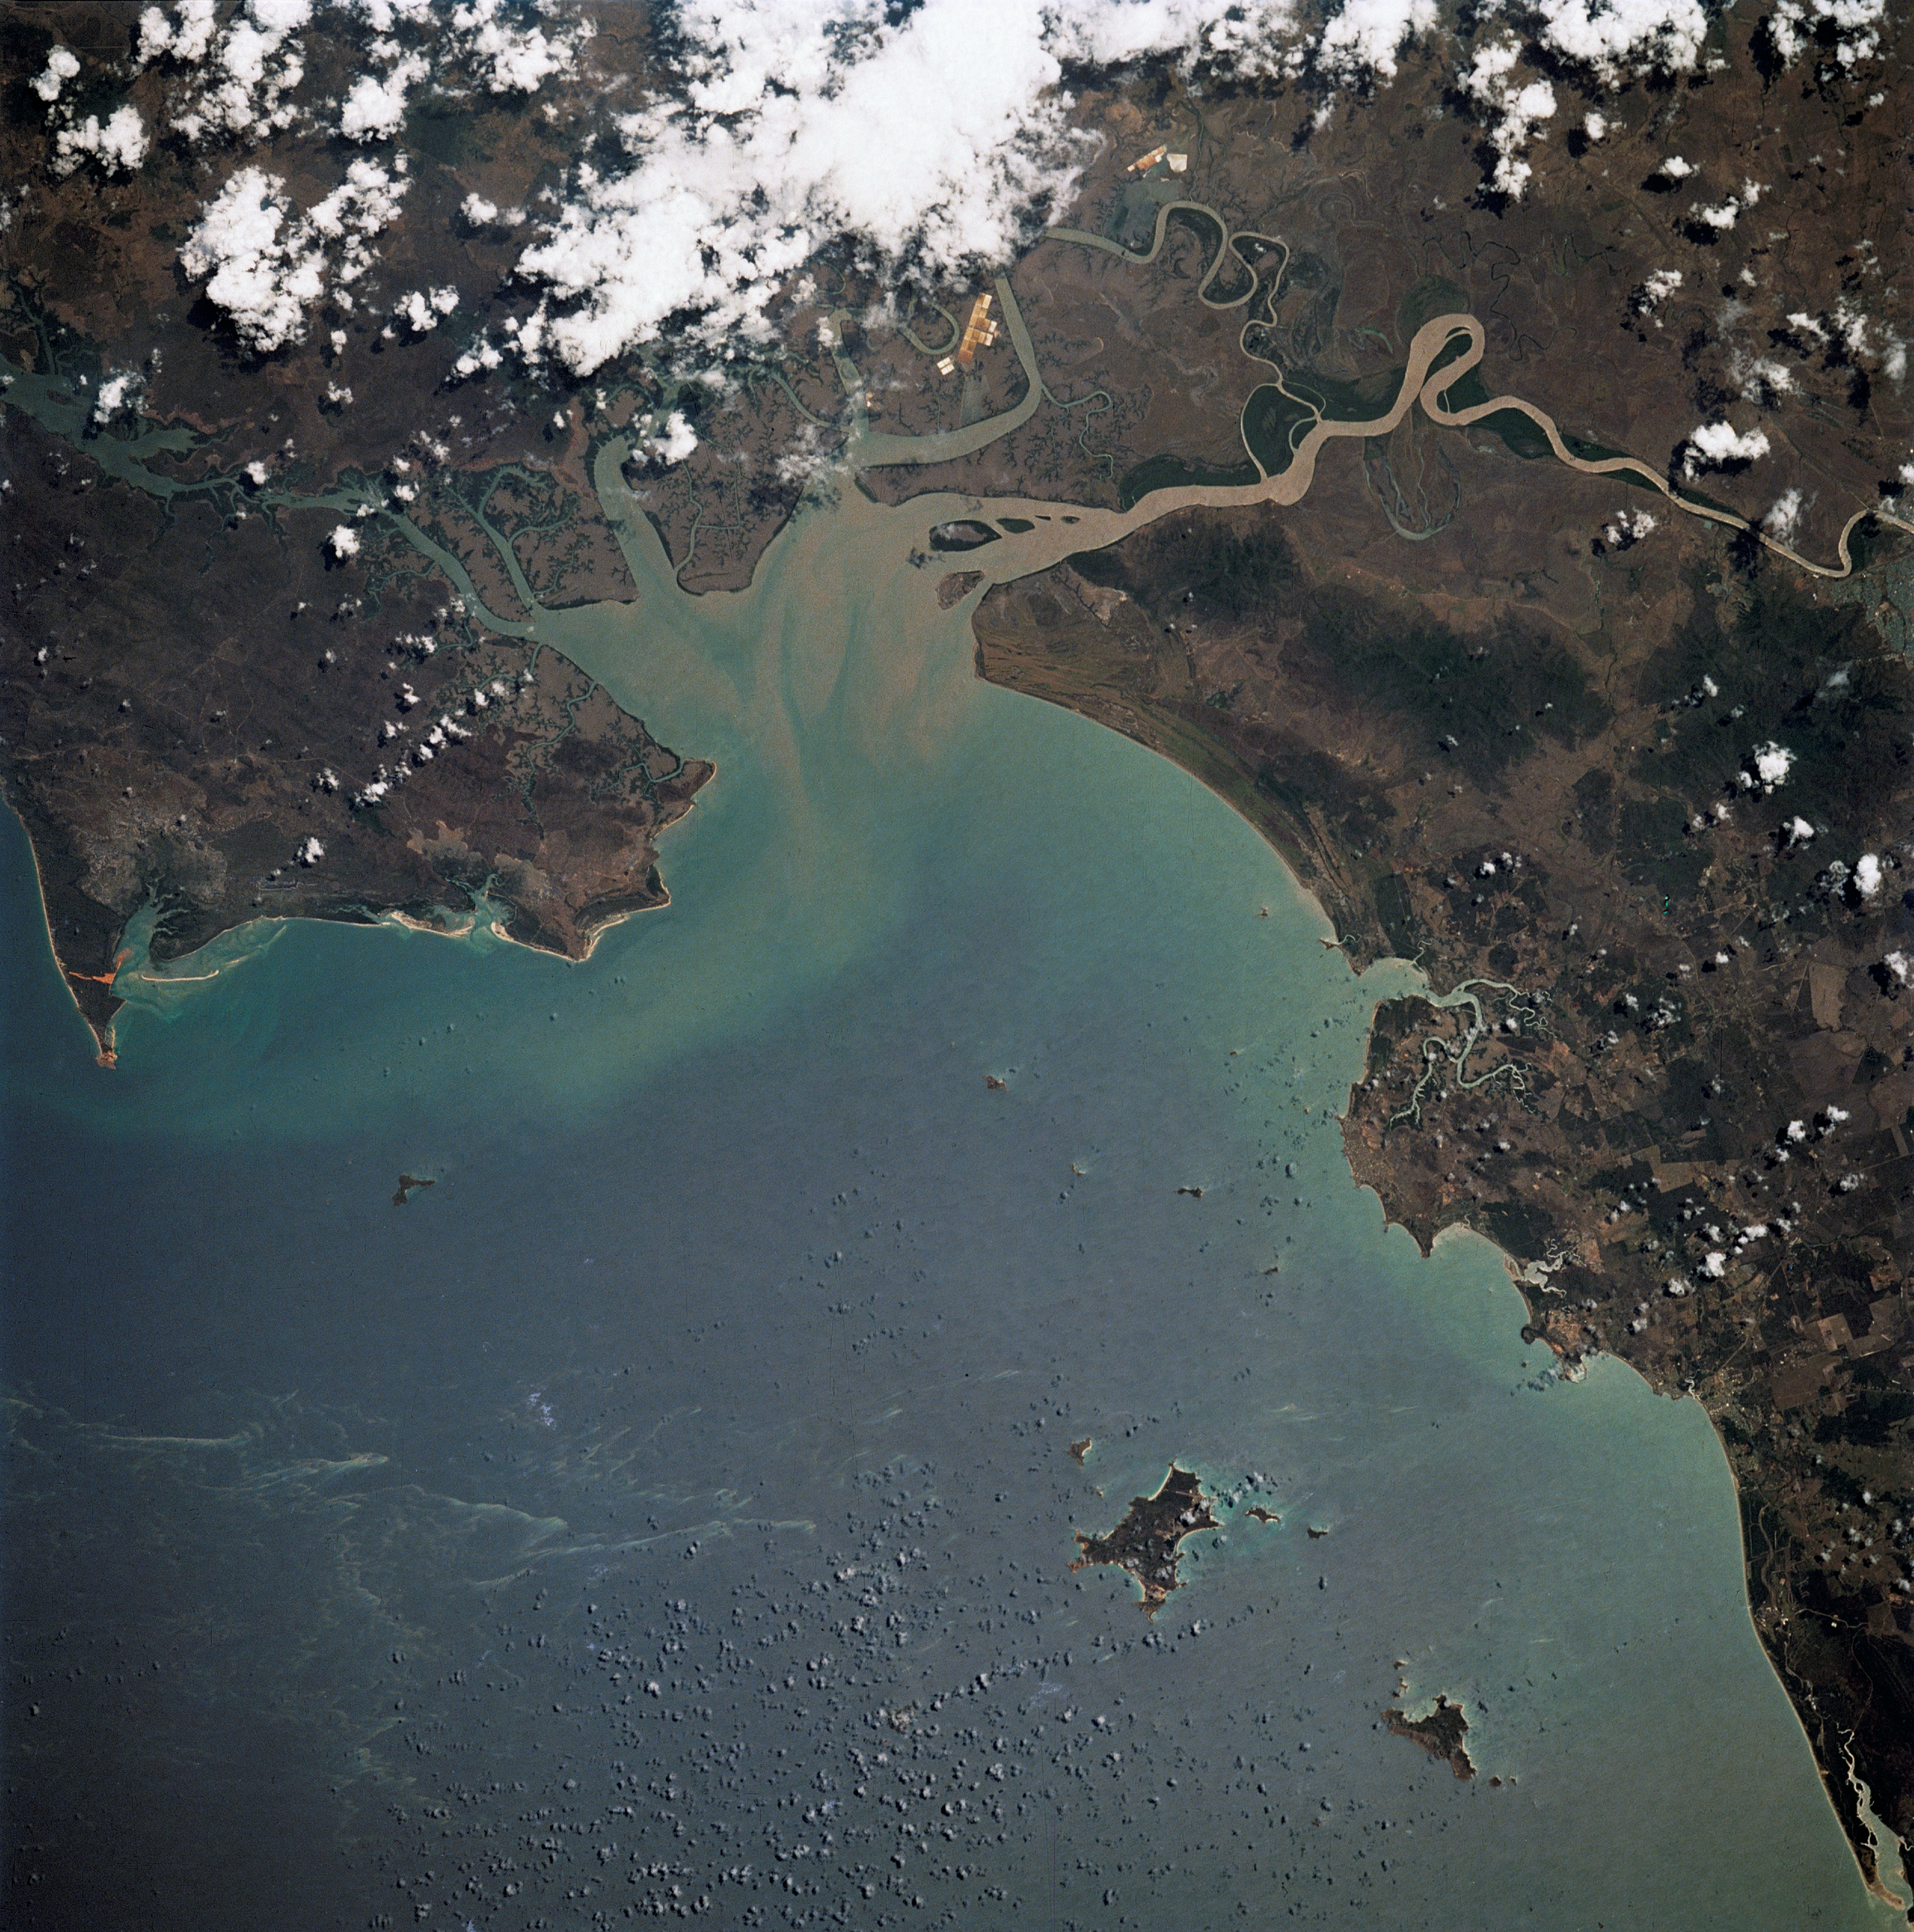 Algal blooms in the ocean, like those seen in this satellite image off the shore of Australia, can have harmful environmental effects -- but the plant itself can be harnessed for good. NASA has built a technology that uses the tiny green plants to clean wastewater and generate biofuel, and it’s available for companies to license. Credit: NASA